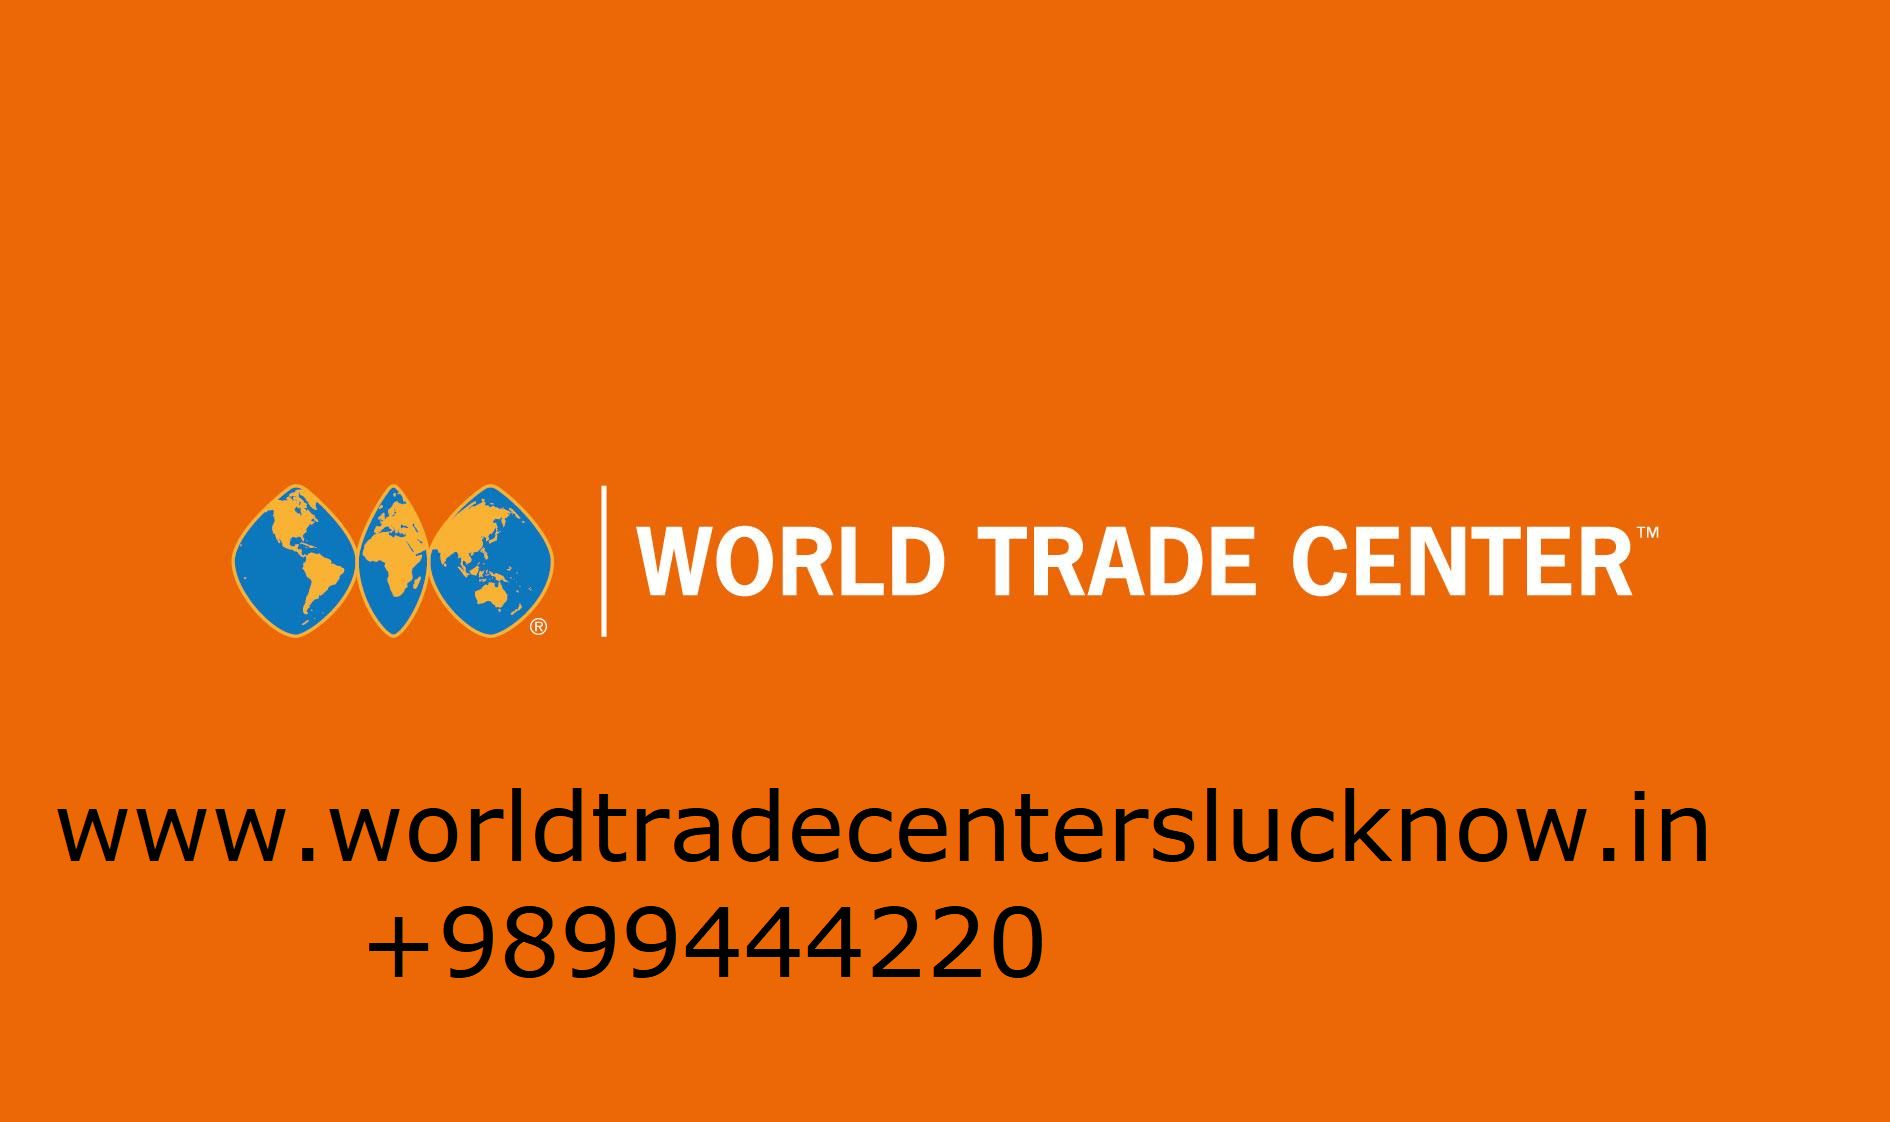 WTC CBD Noida - A Lucrative Commercial Property With High Gains